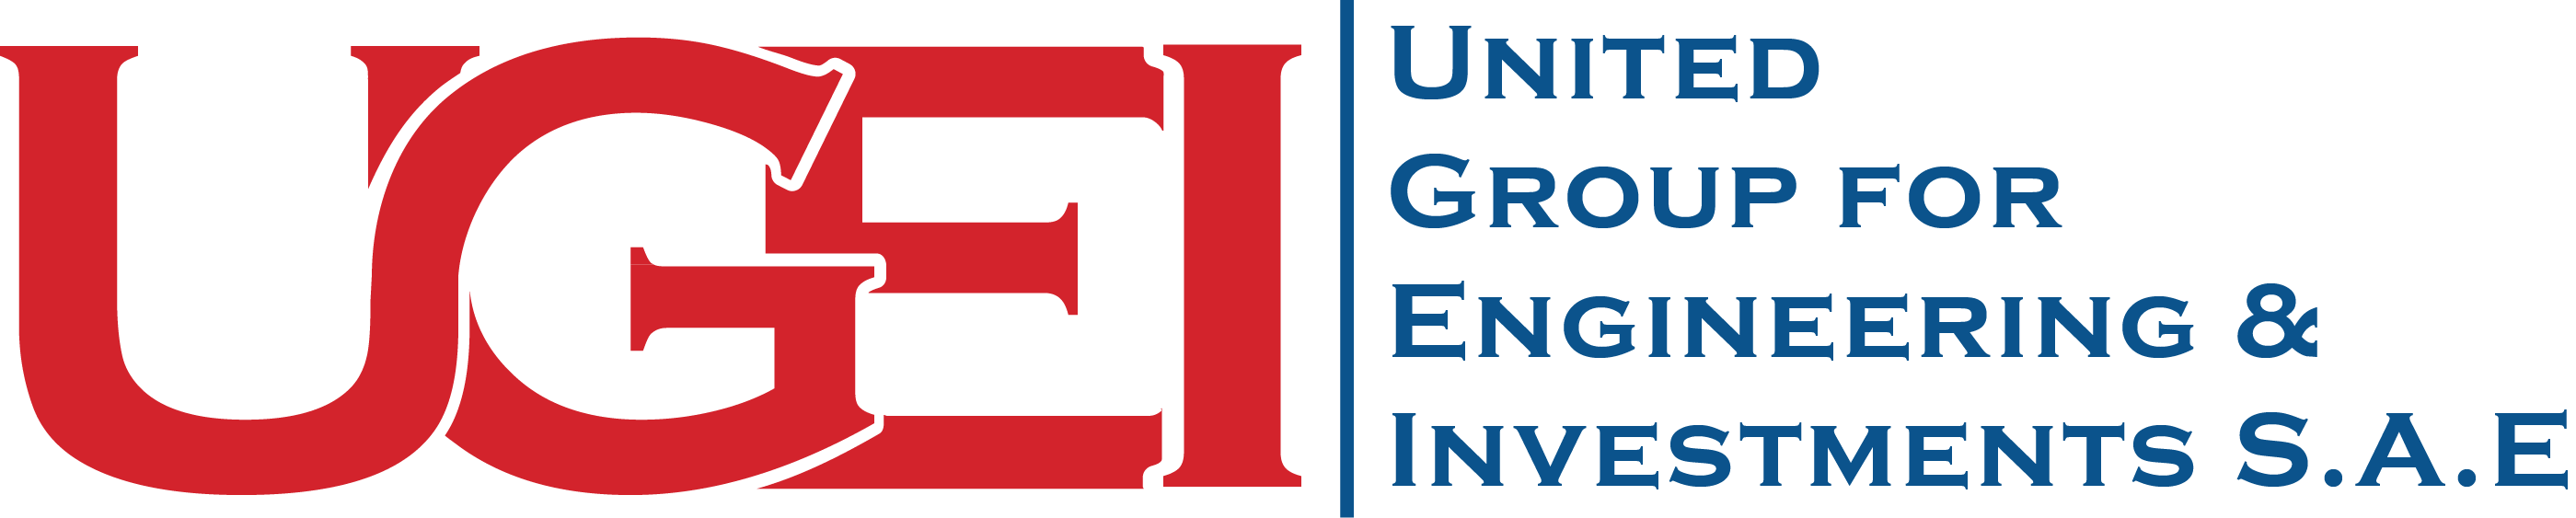 United Group For Engineering And Investments UGEI.pngUnited Group For Engineering And Investments - UGEI